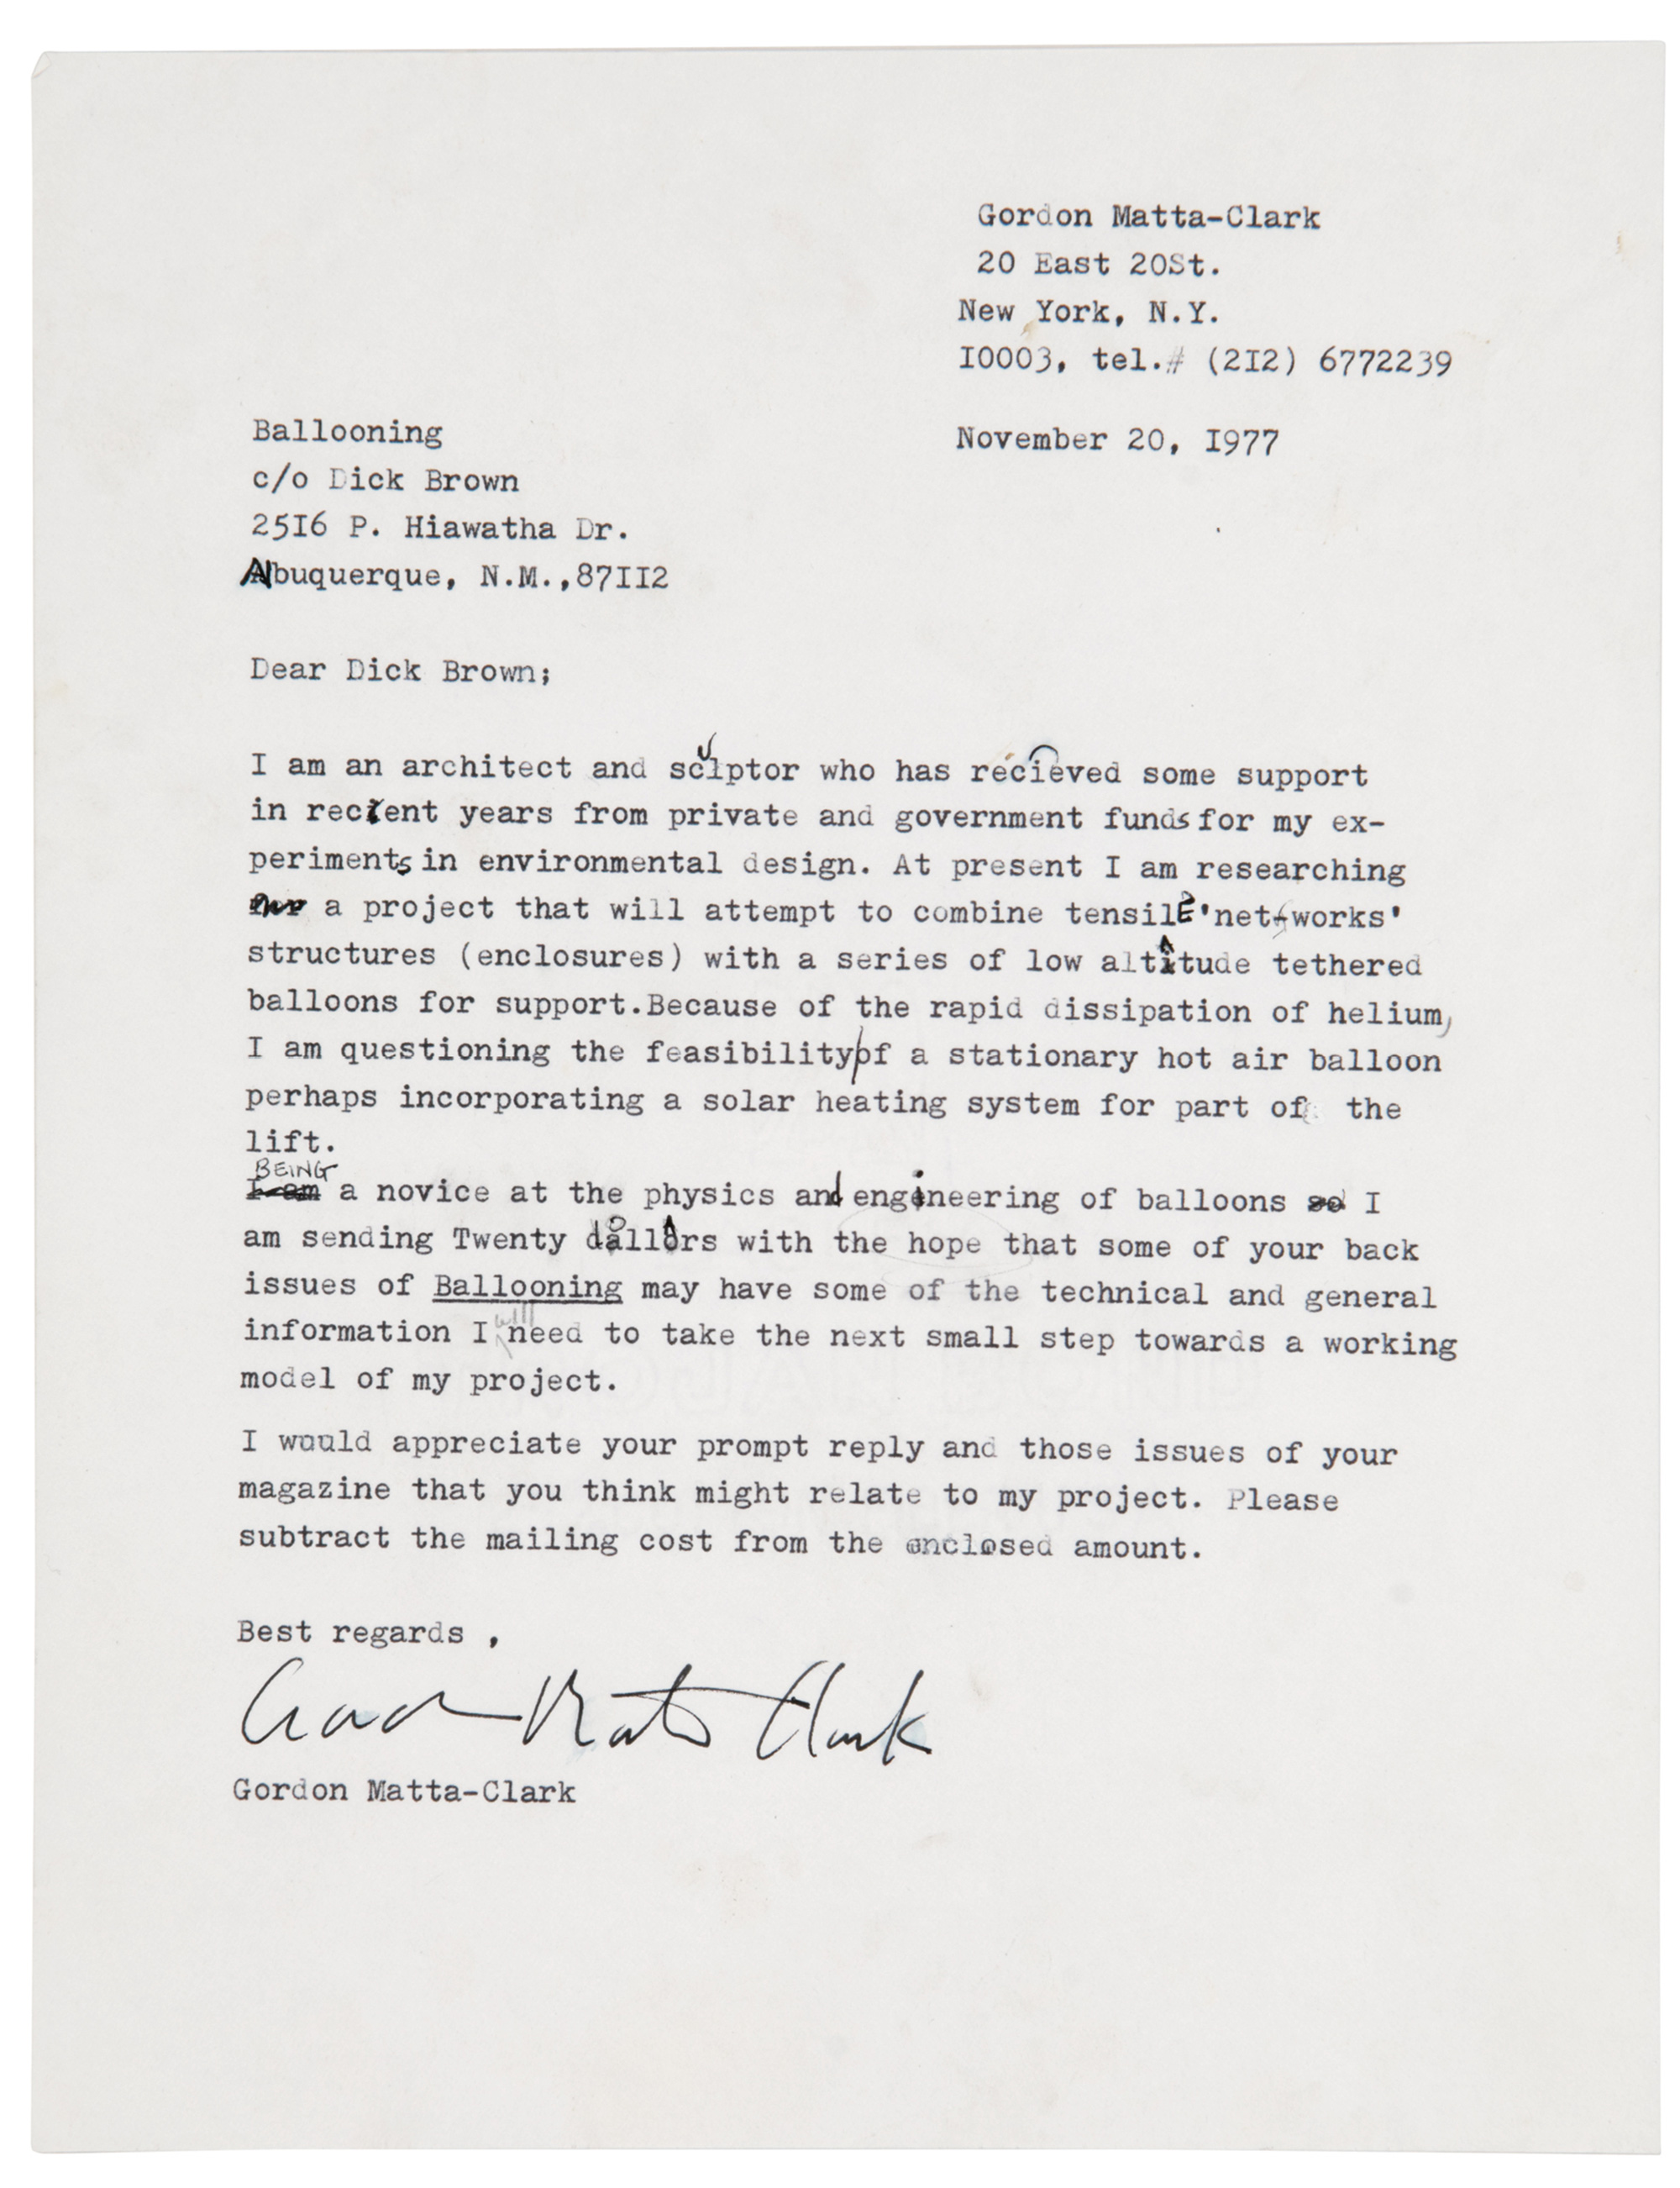 A 1977 letter from Gordon Matta-Clark to Dick Brown at Ballooning, The Journal of the Balloon Federation of America.